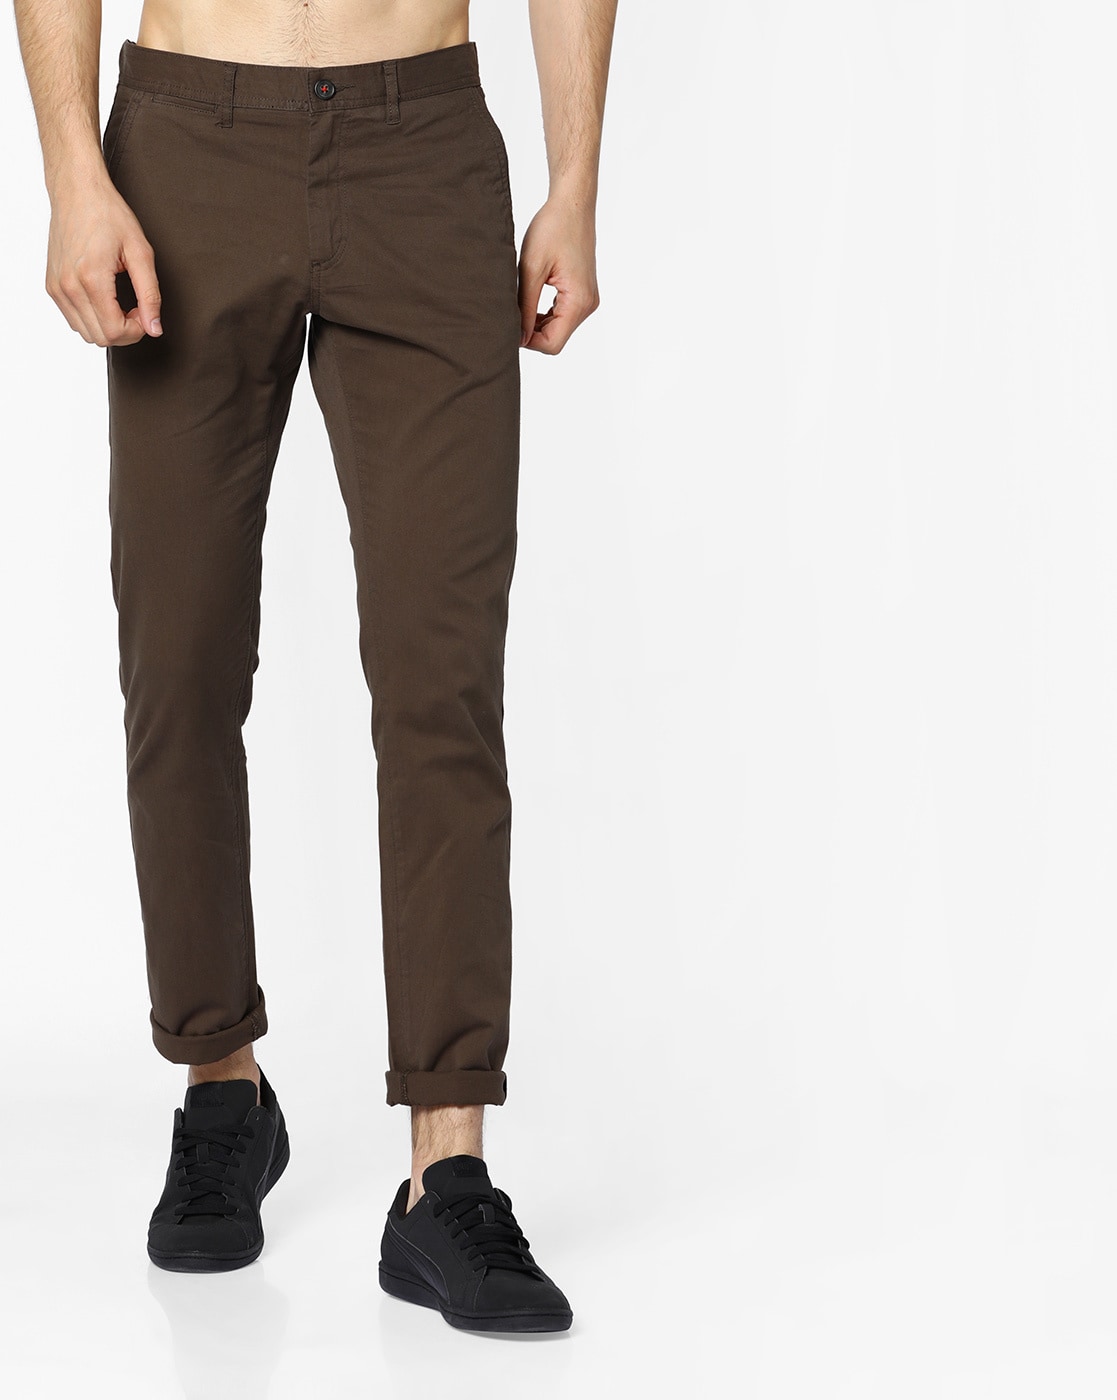 Buy Casual Trousers  Chinos for Men from Online Shop in India  NNNOW